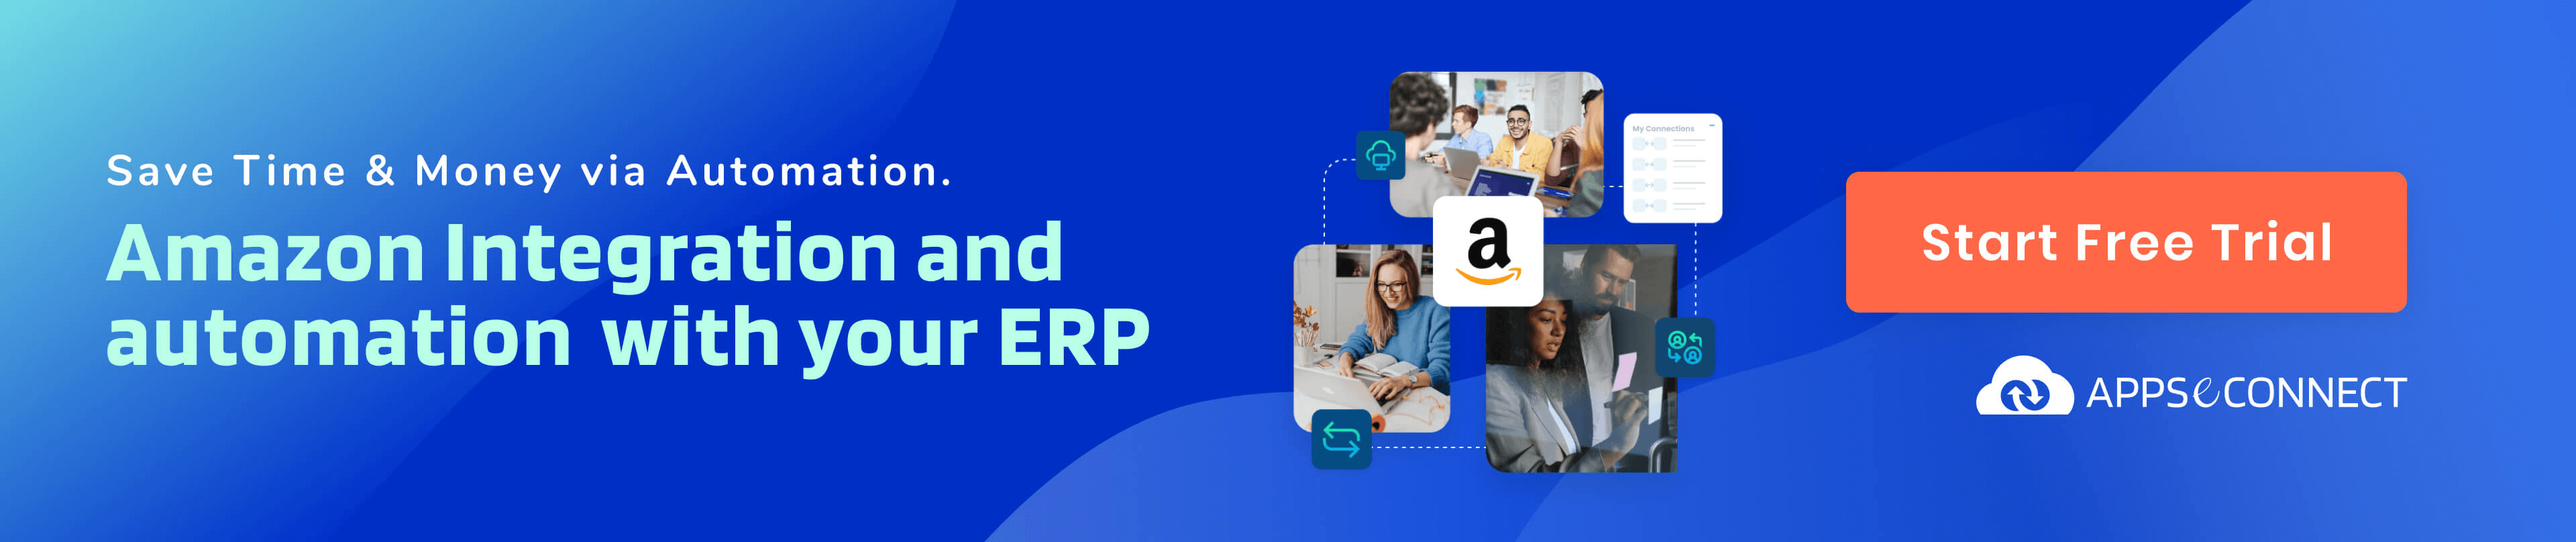 Amazon-integration-with-ERP